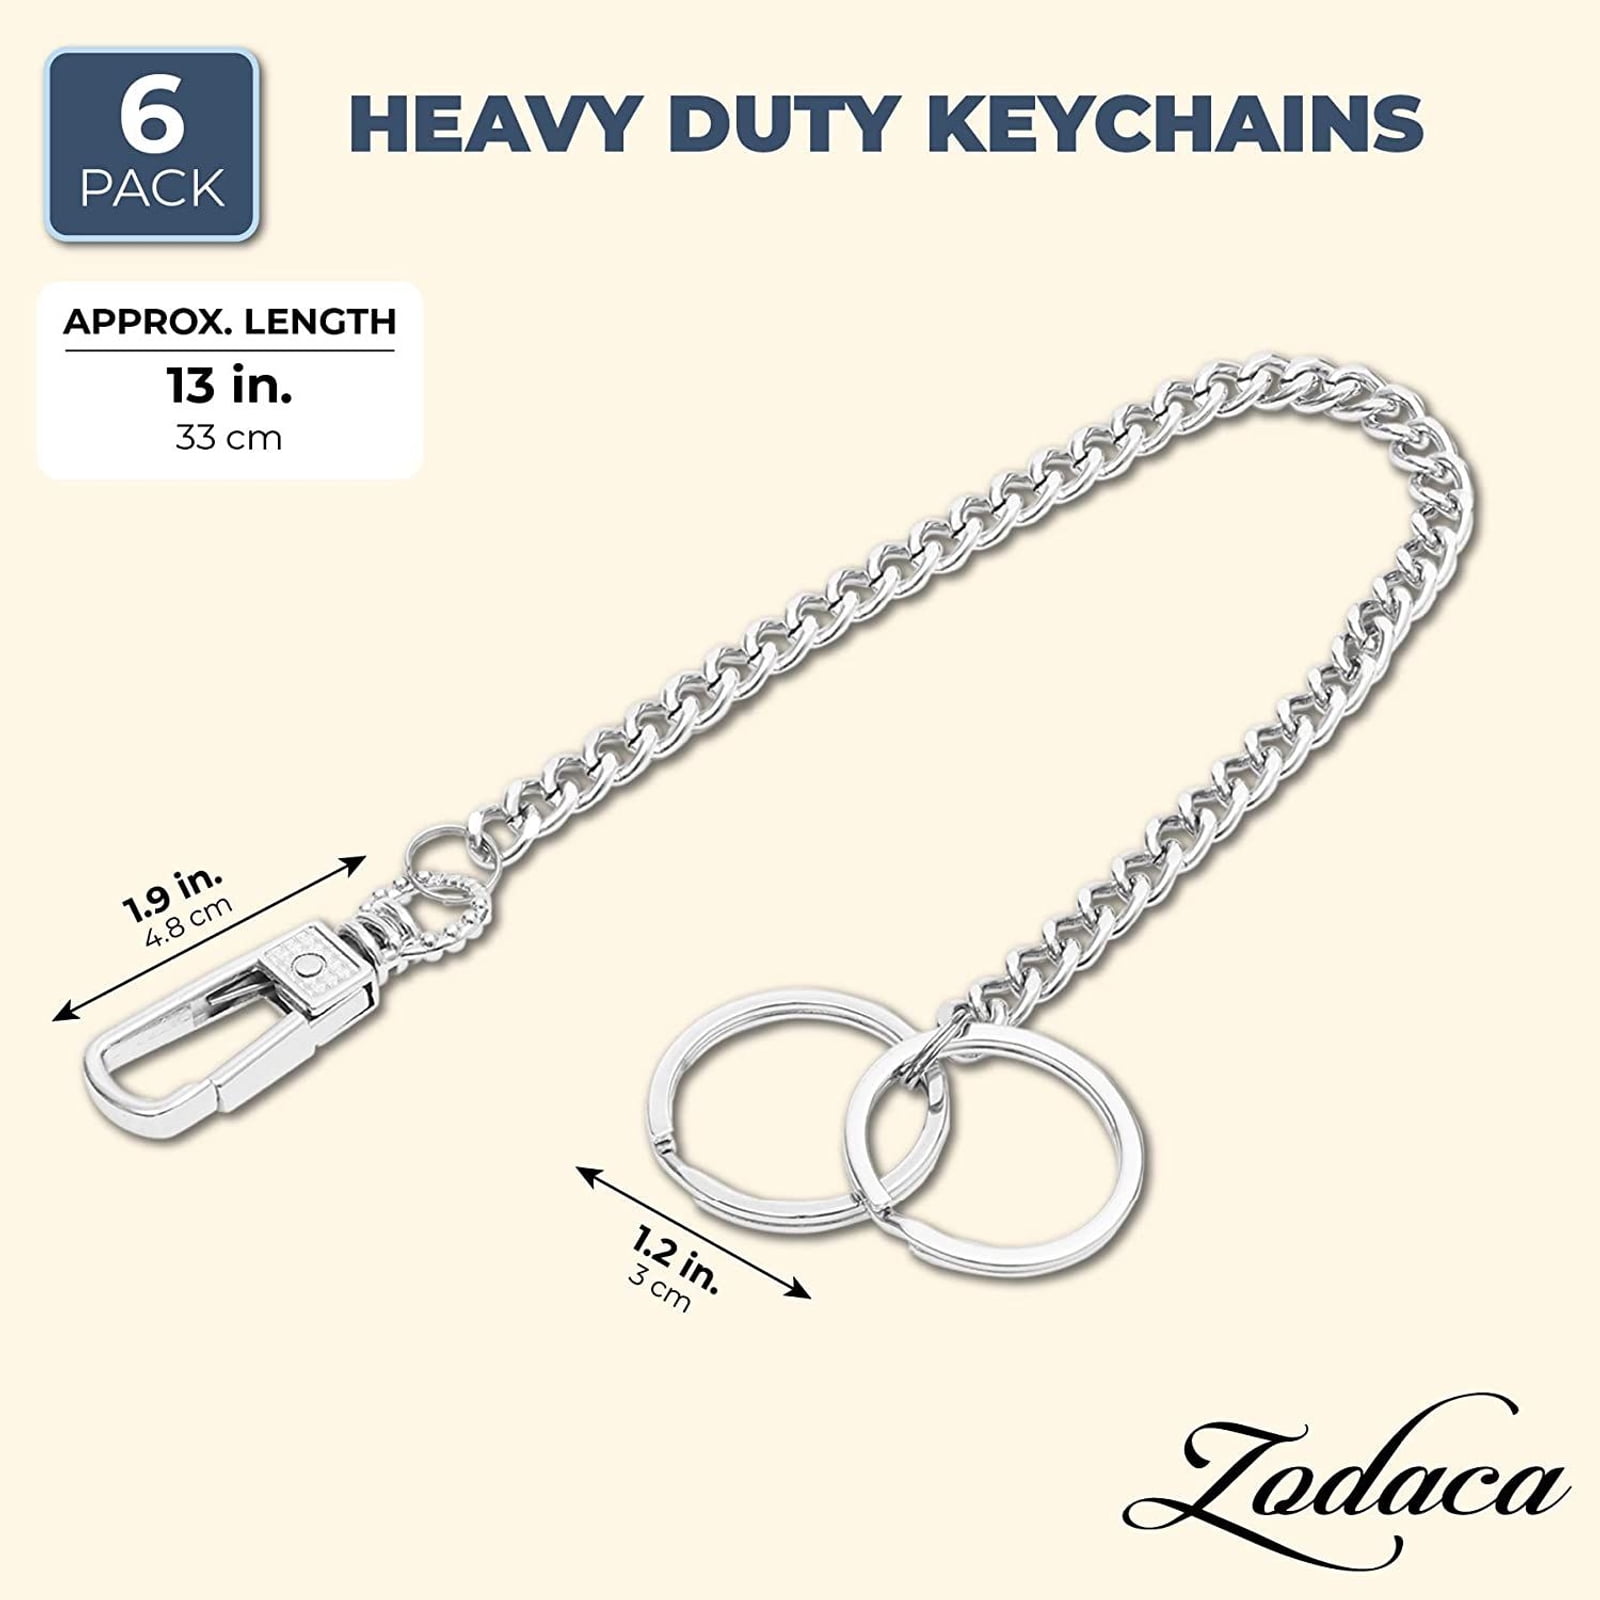 Keychain Heavy Duty Wallet Chain 23 Inch Pocket Key Chain with Lobster  Clasp and Keyrings for Keys and Wallets